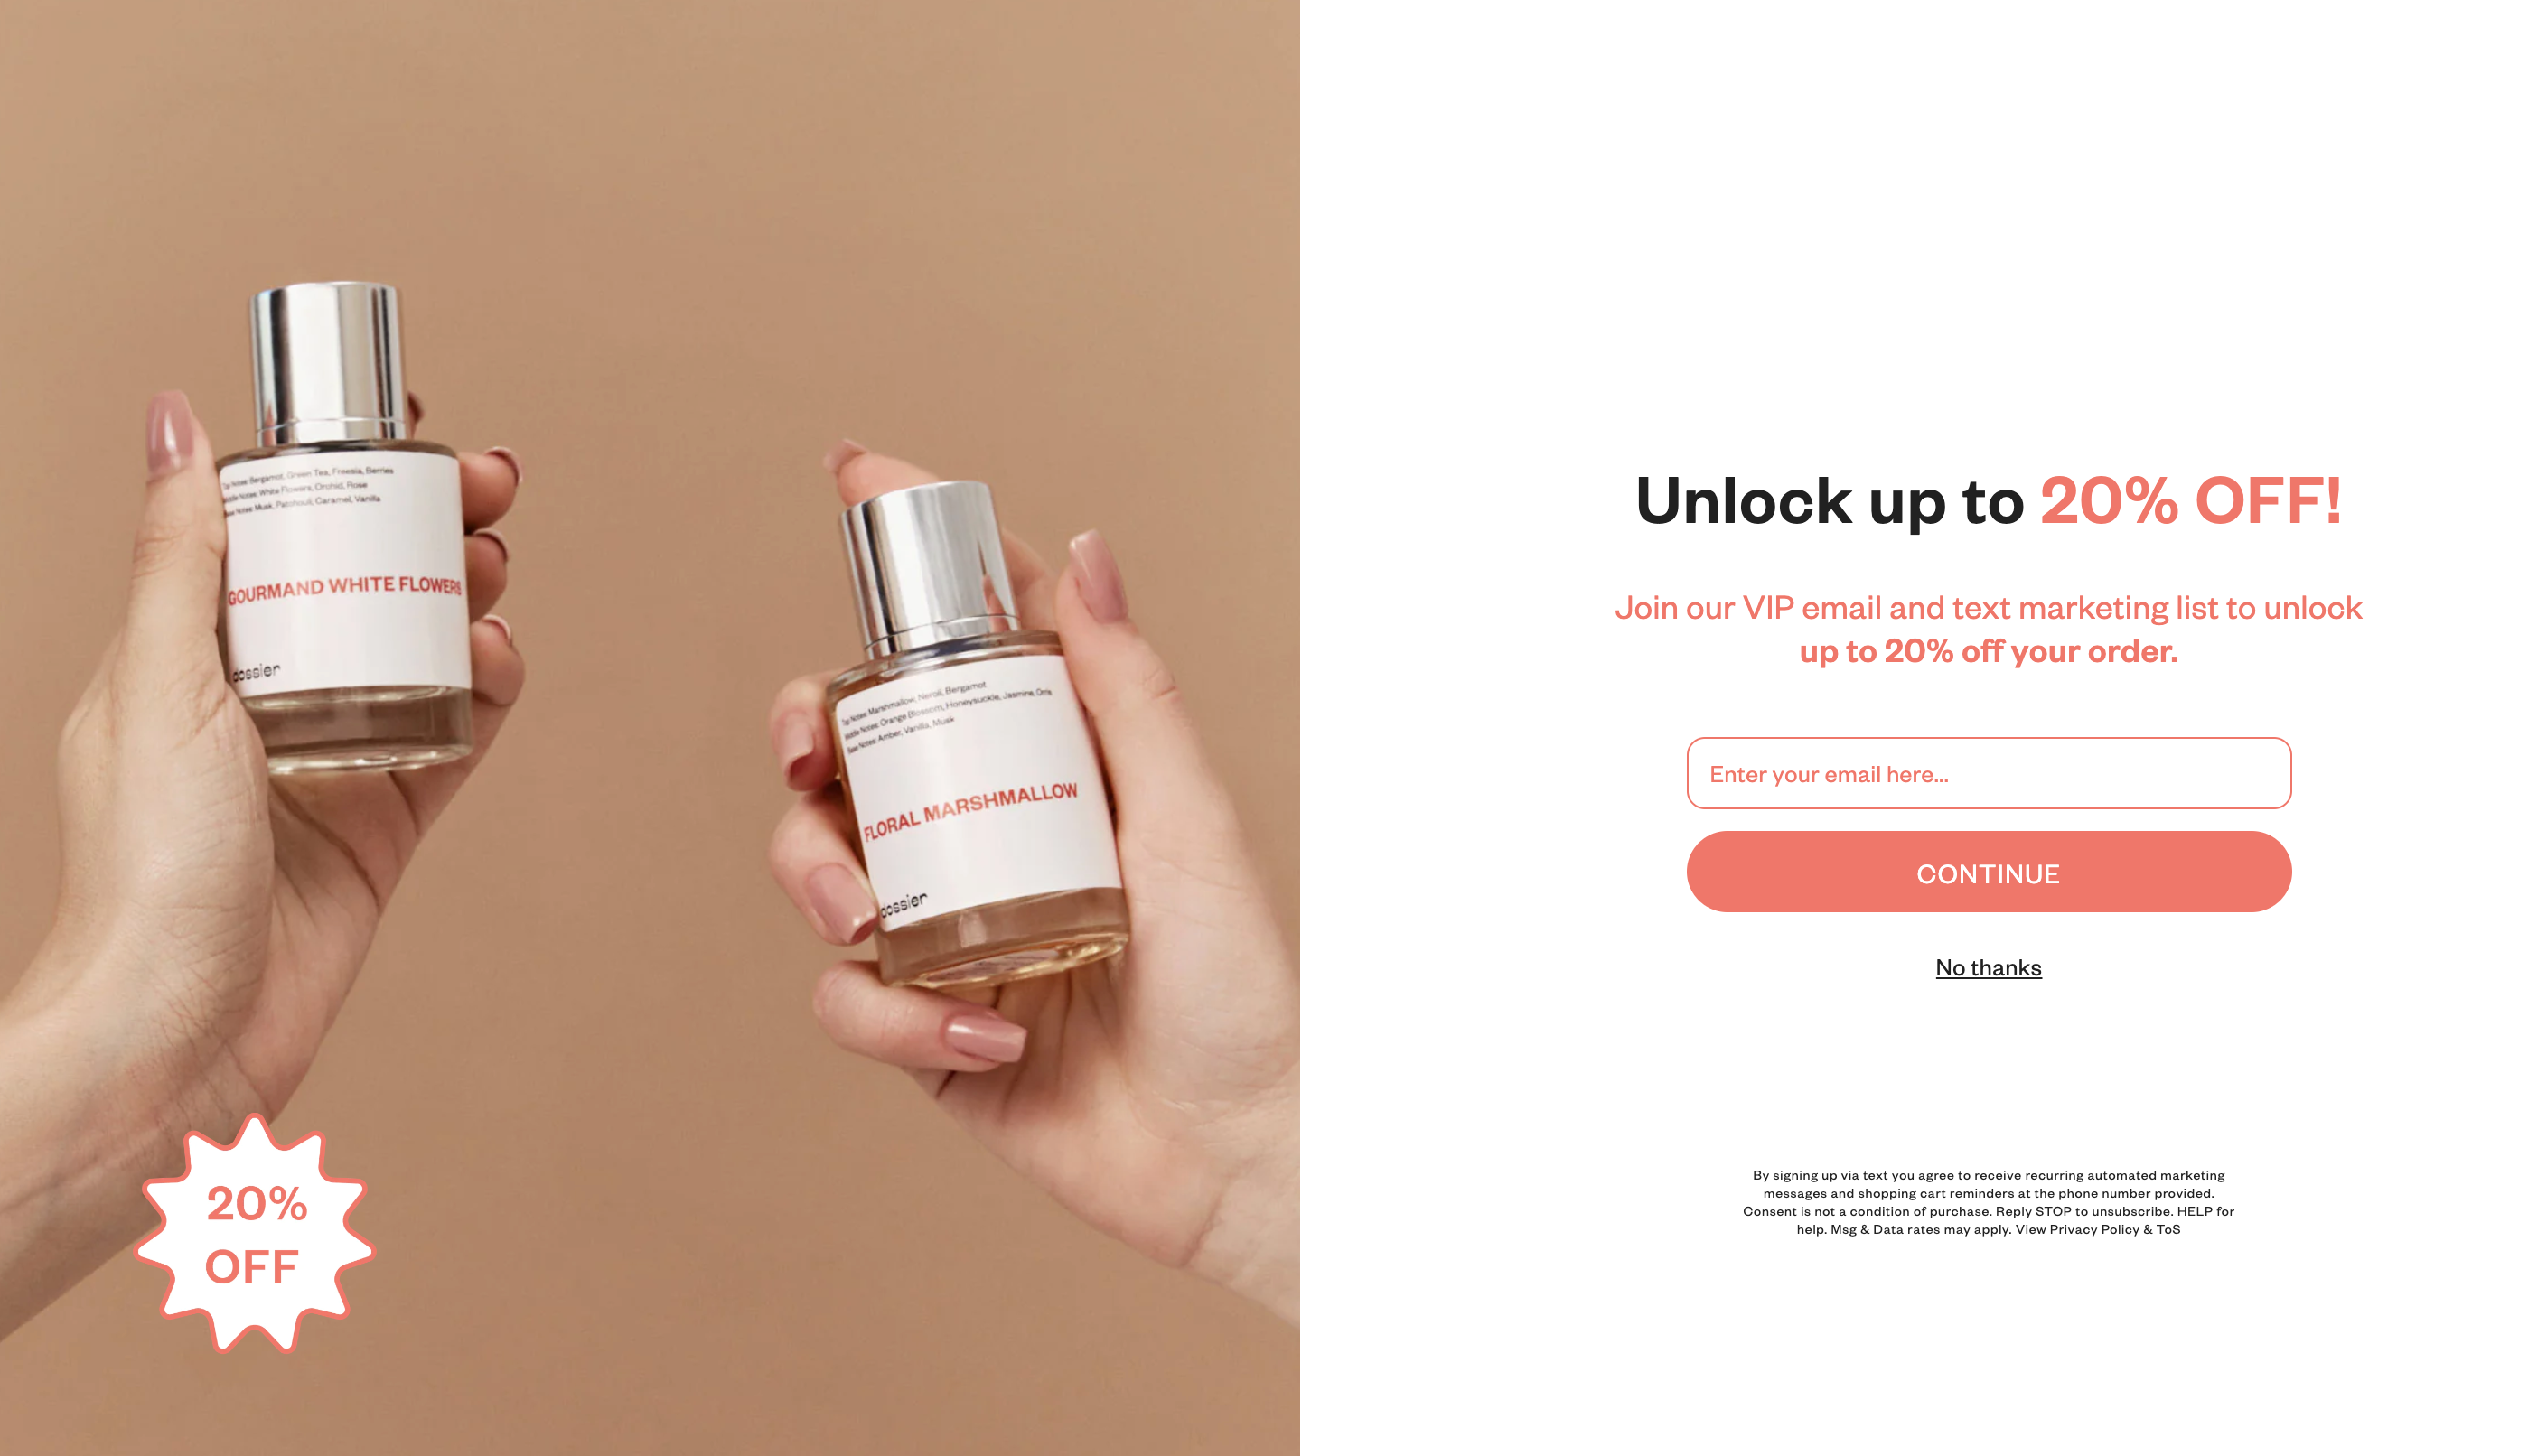 Ecommerce homepage for the brand Dossier